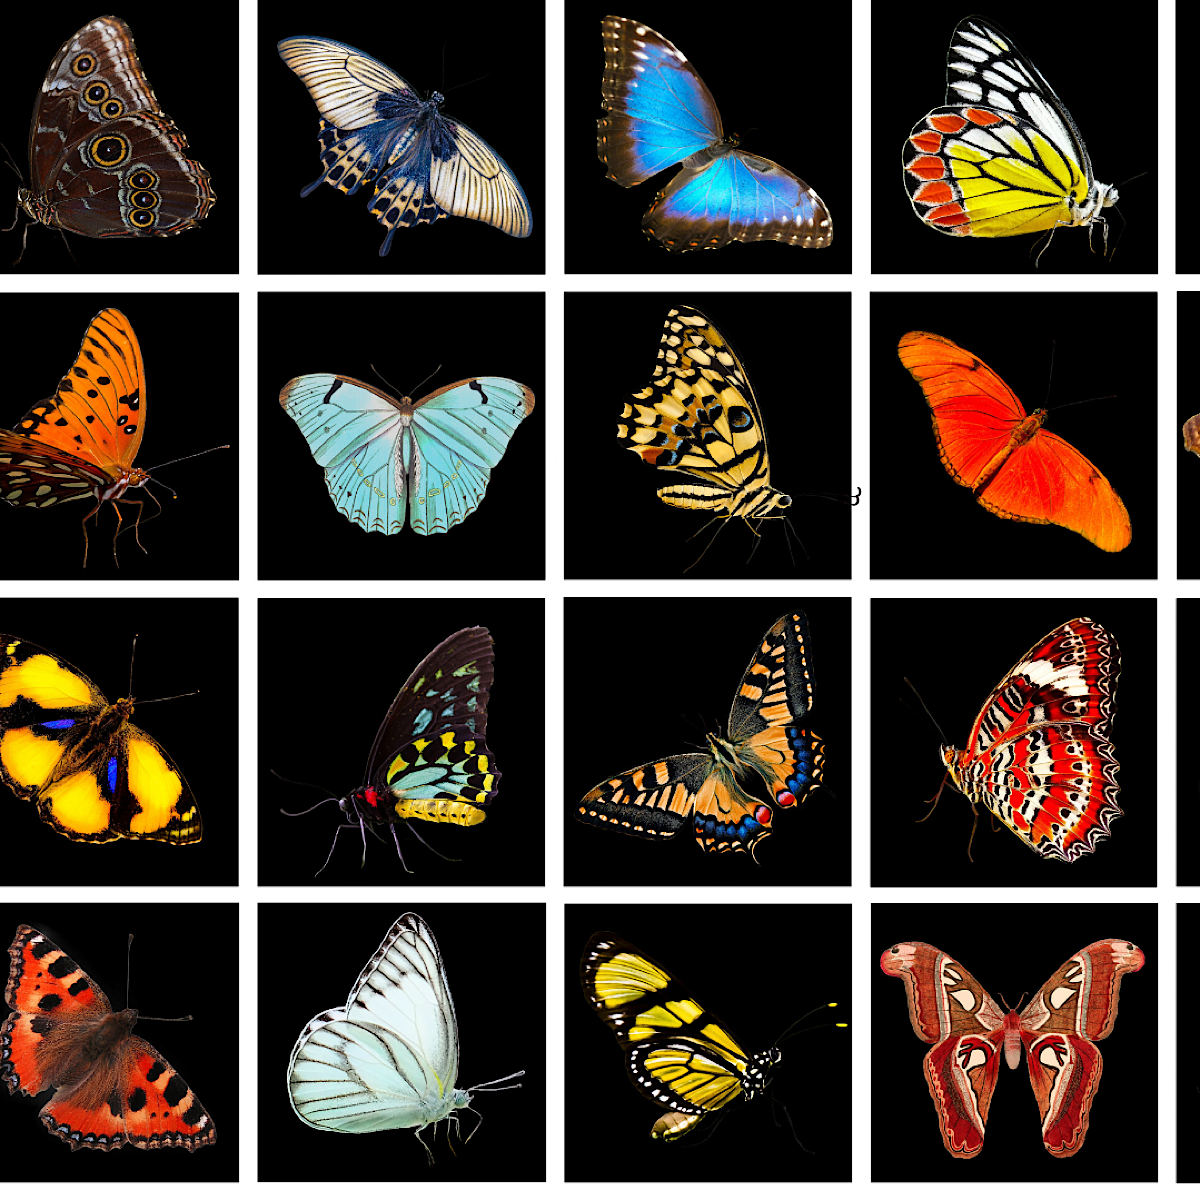 Photo gallery of a range of butterfly species.